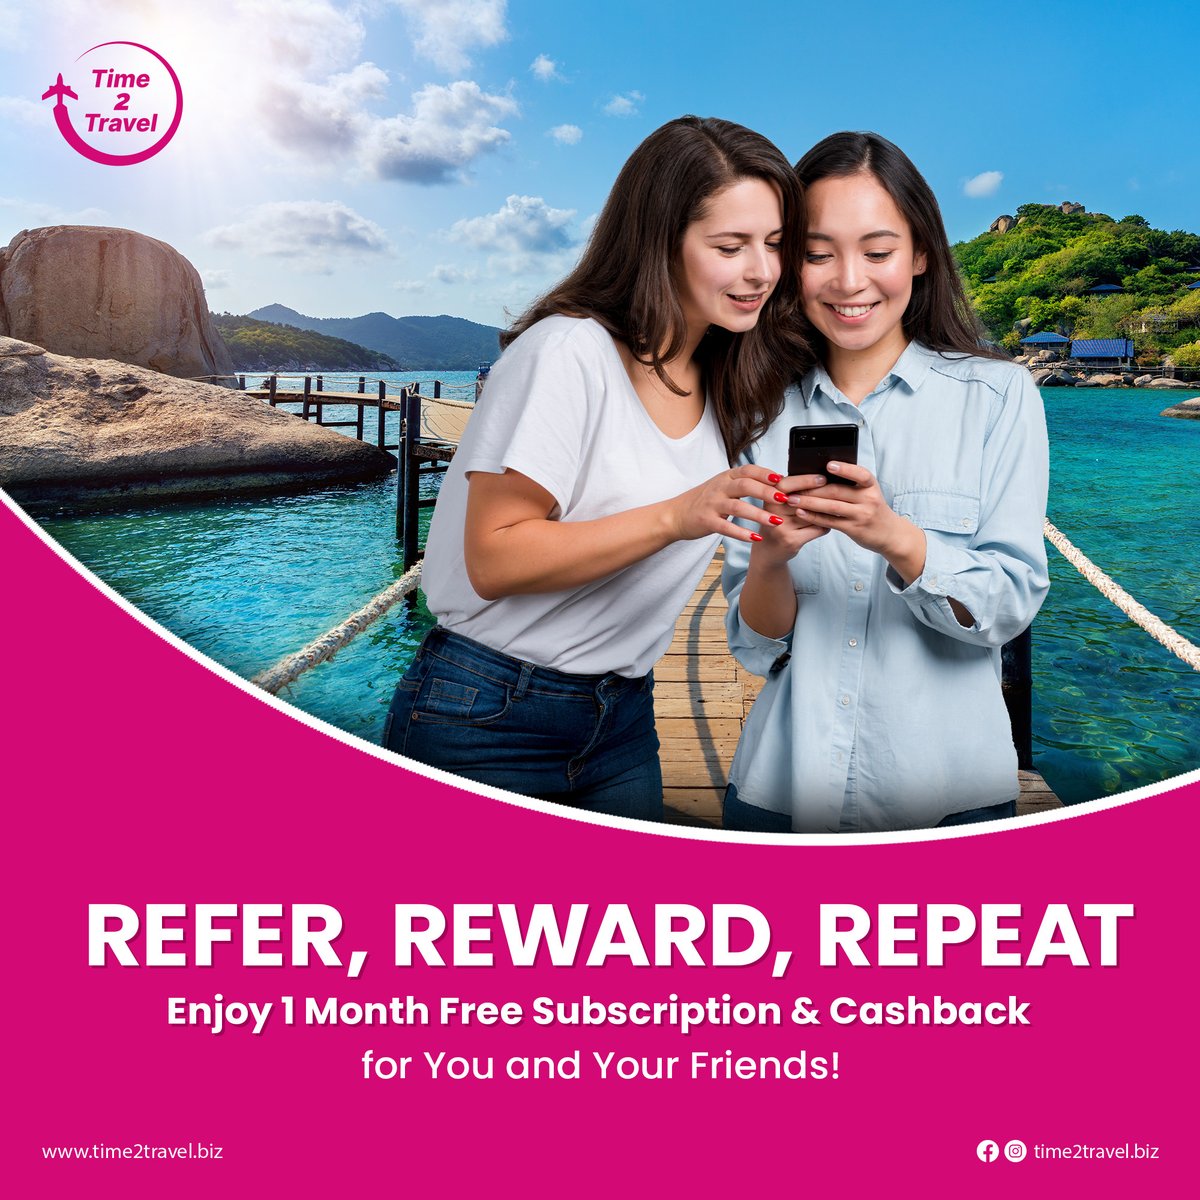 Unlock a cycle of rewards with Time2Travel! 🌍✨ Refer, Reward, Repeat: Enjoy 1 Month Free Subscription and Cashback for both you and your friends. 

#Time2Travel #ReferralRewards #AdventureAwaits #ReferralProgram #TravelRewards #FlyWithBFICoin #BeyondBorders #BFIC #Cheapflights